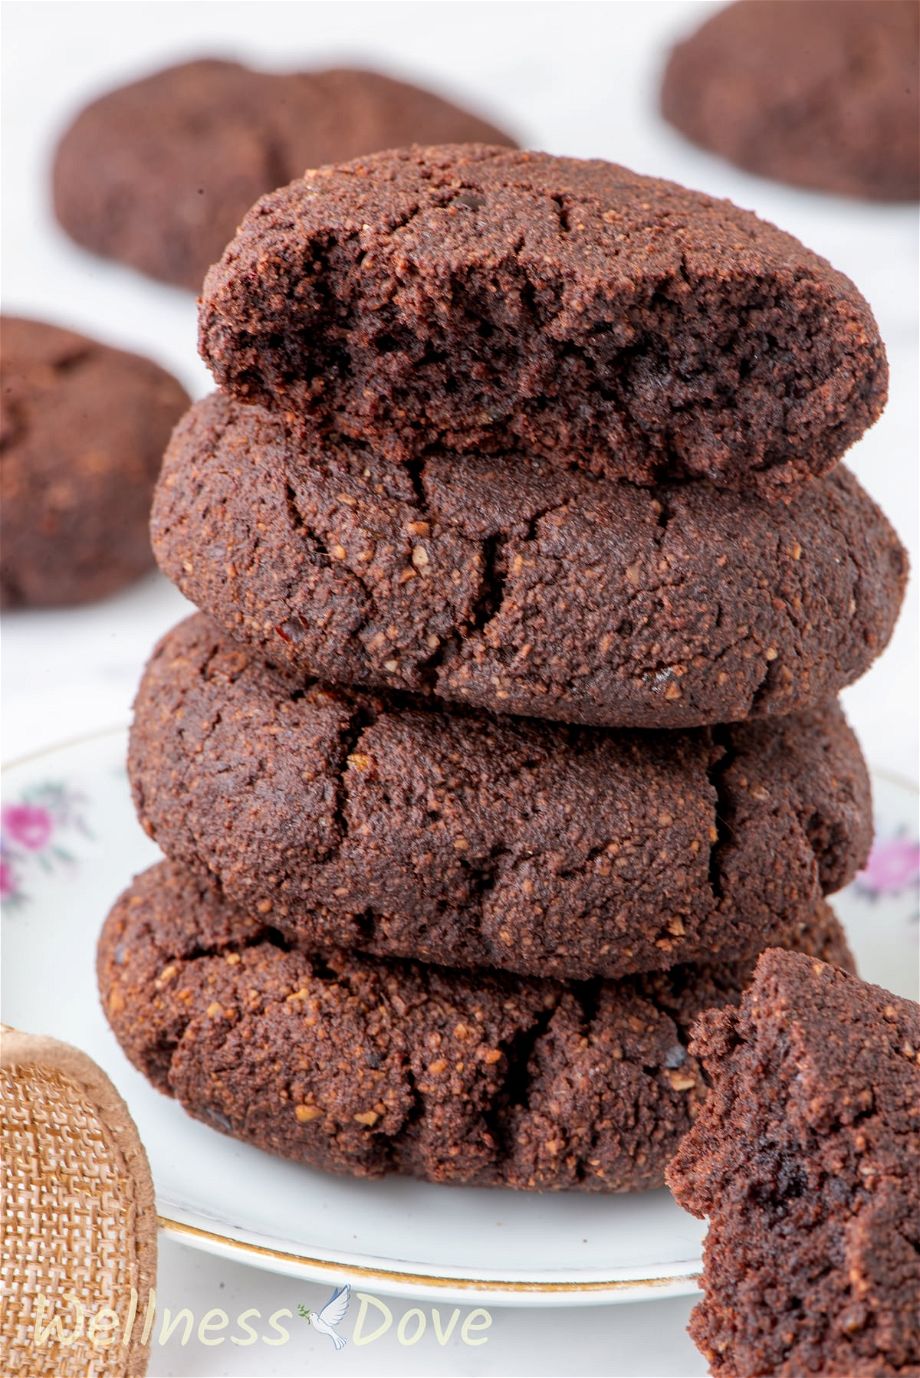 The Easy Chocolate Almond Vegan Cookies on a small plate, front view.